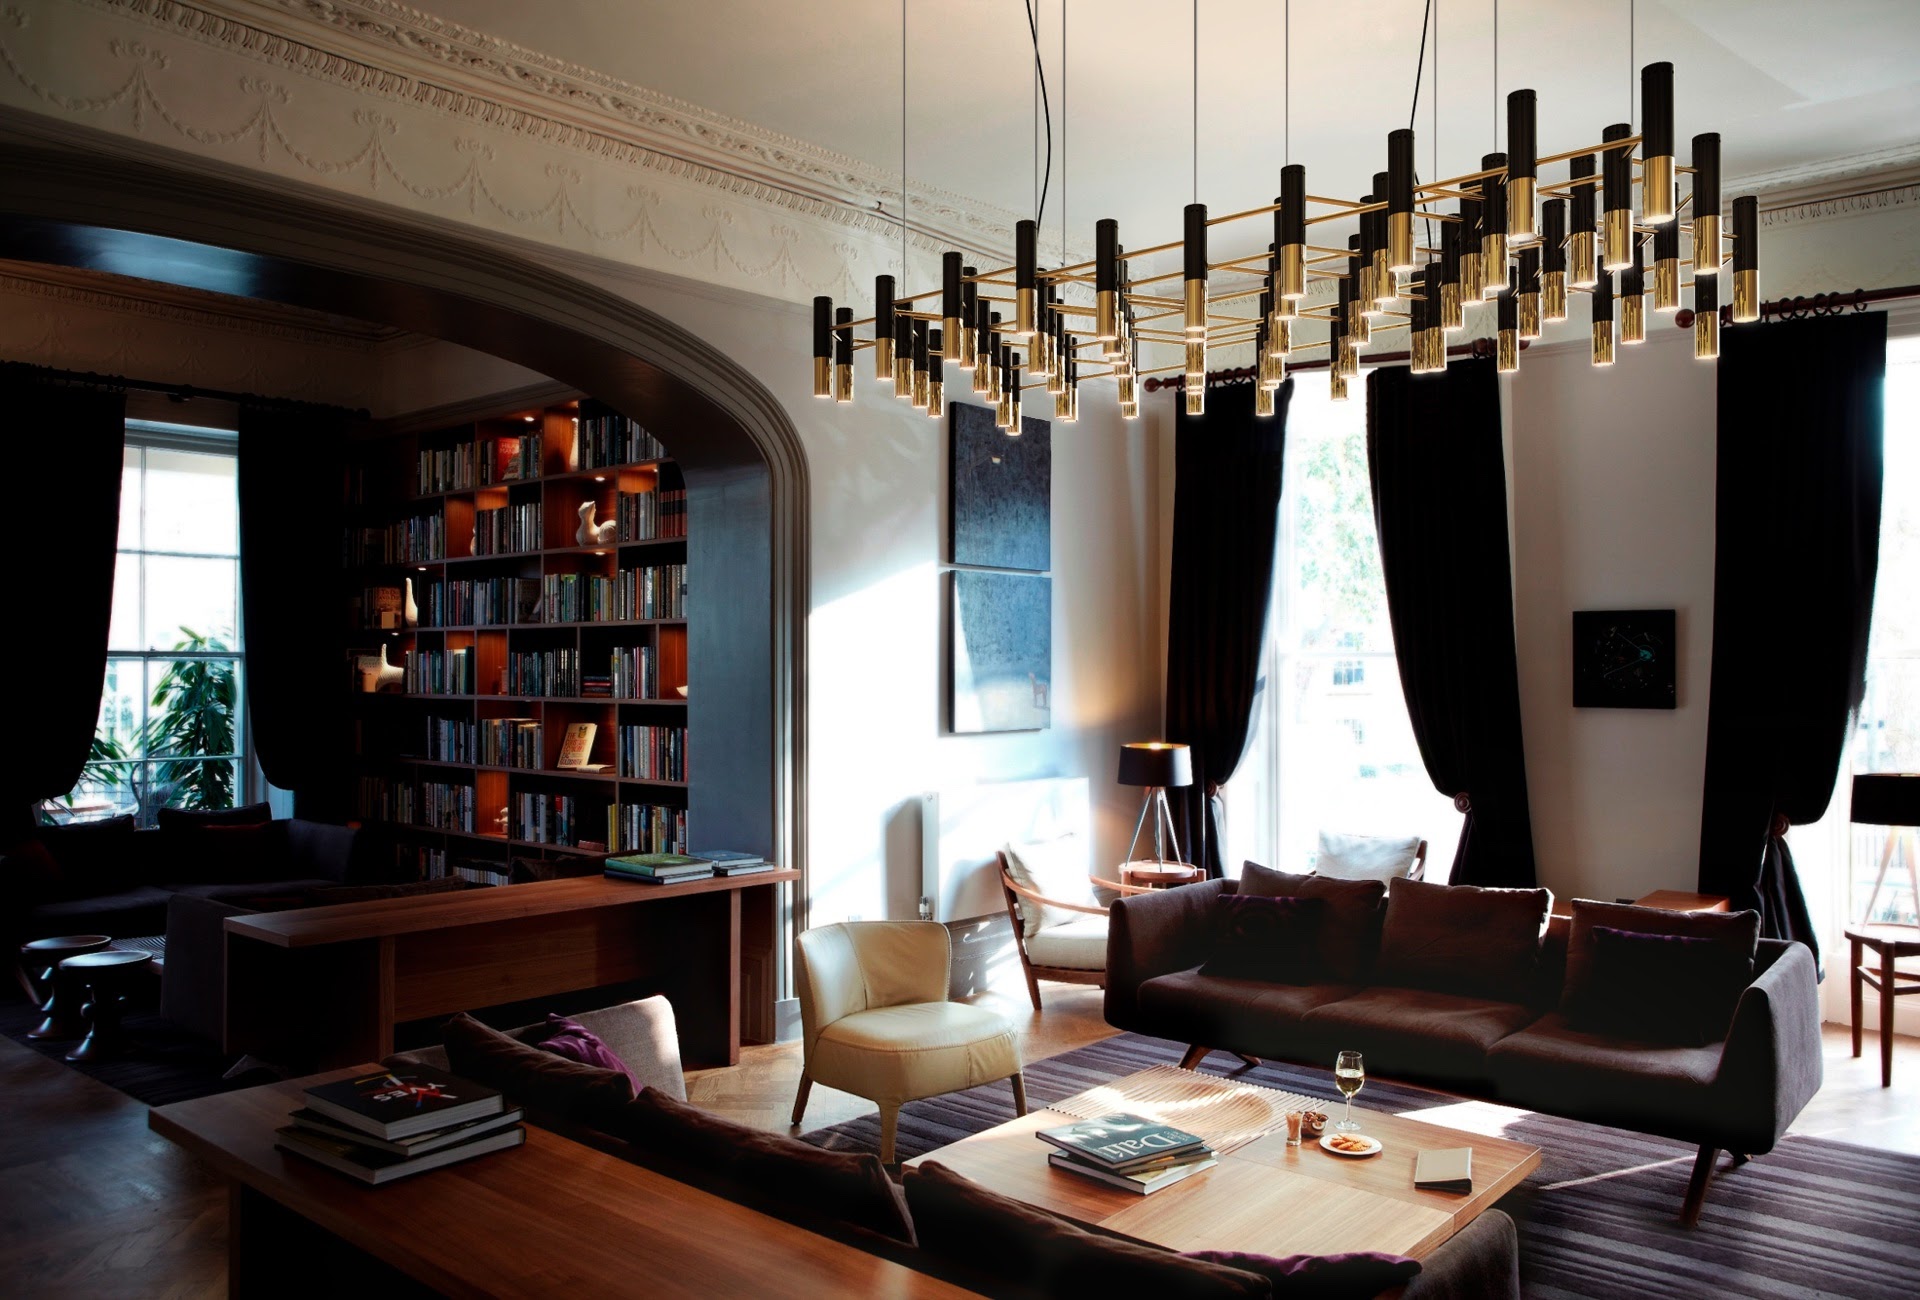 Fun and Refinement with DelightFULL’s Lighting Designs